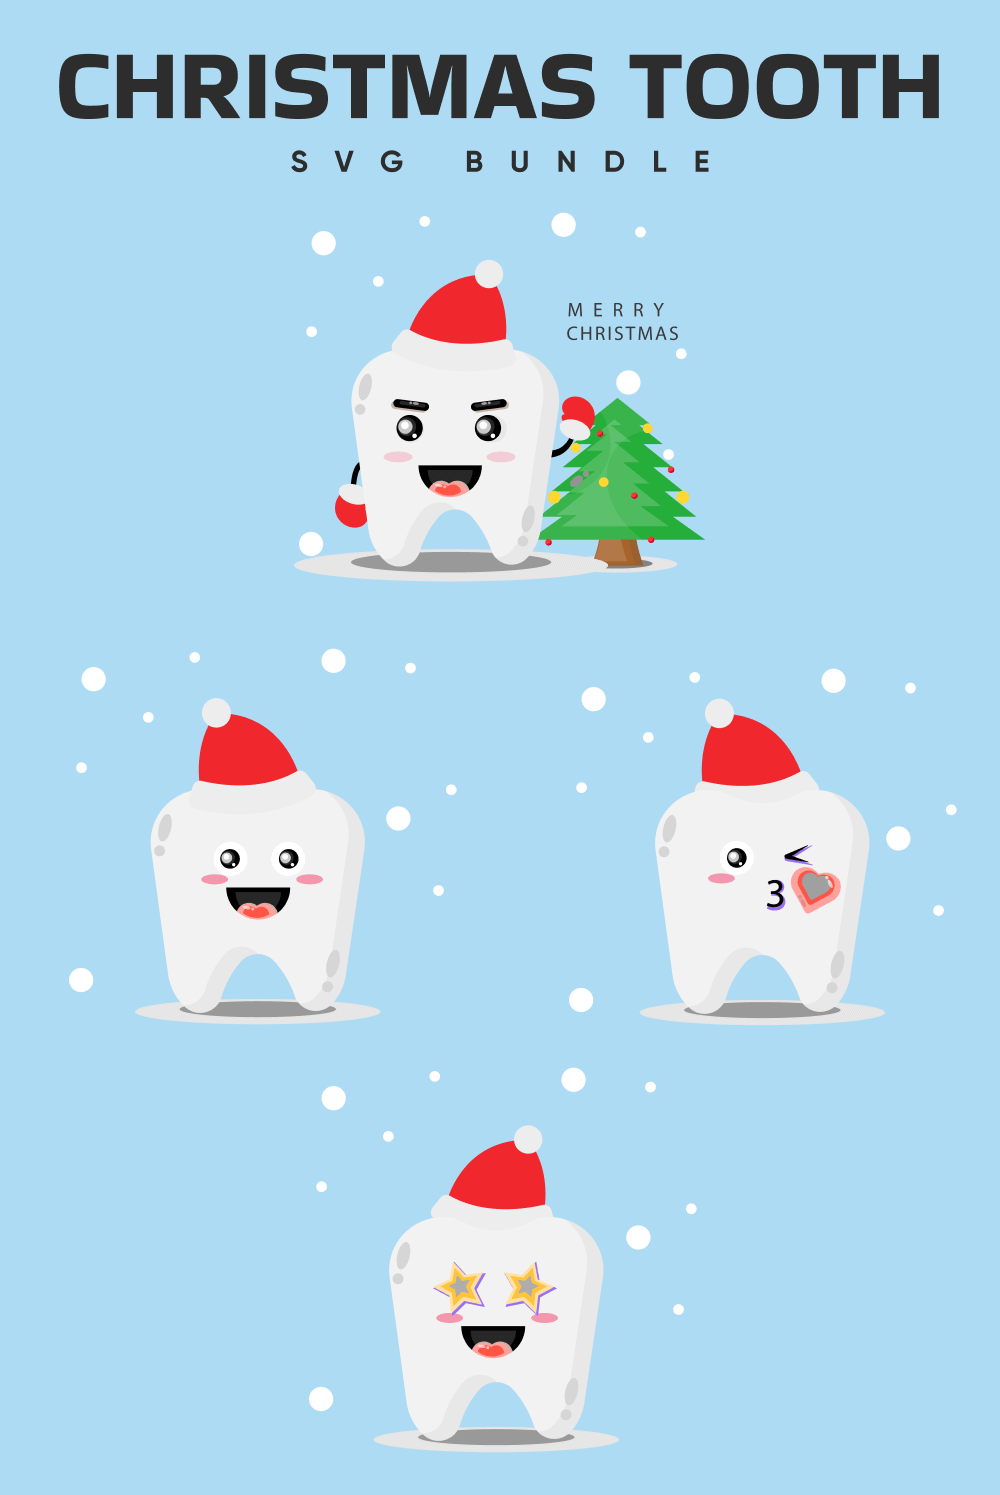 Four Christmas teeth on a blue background with snow.